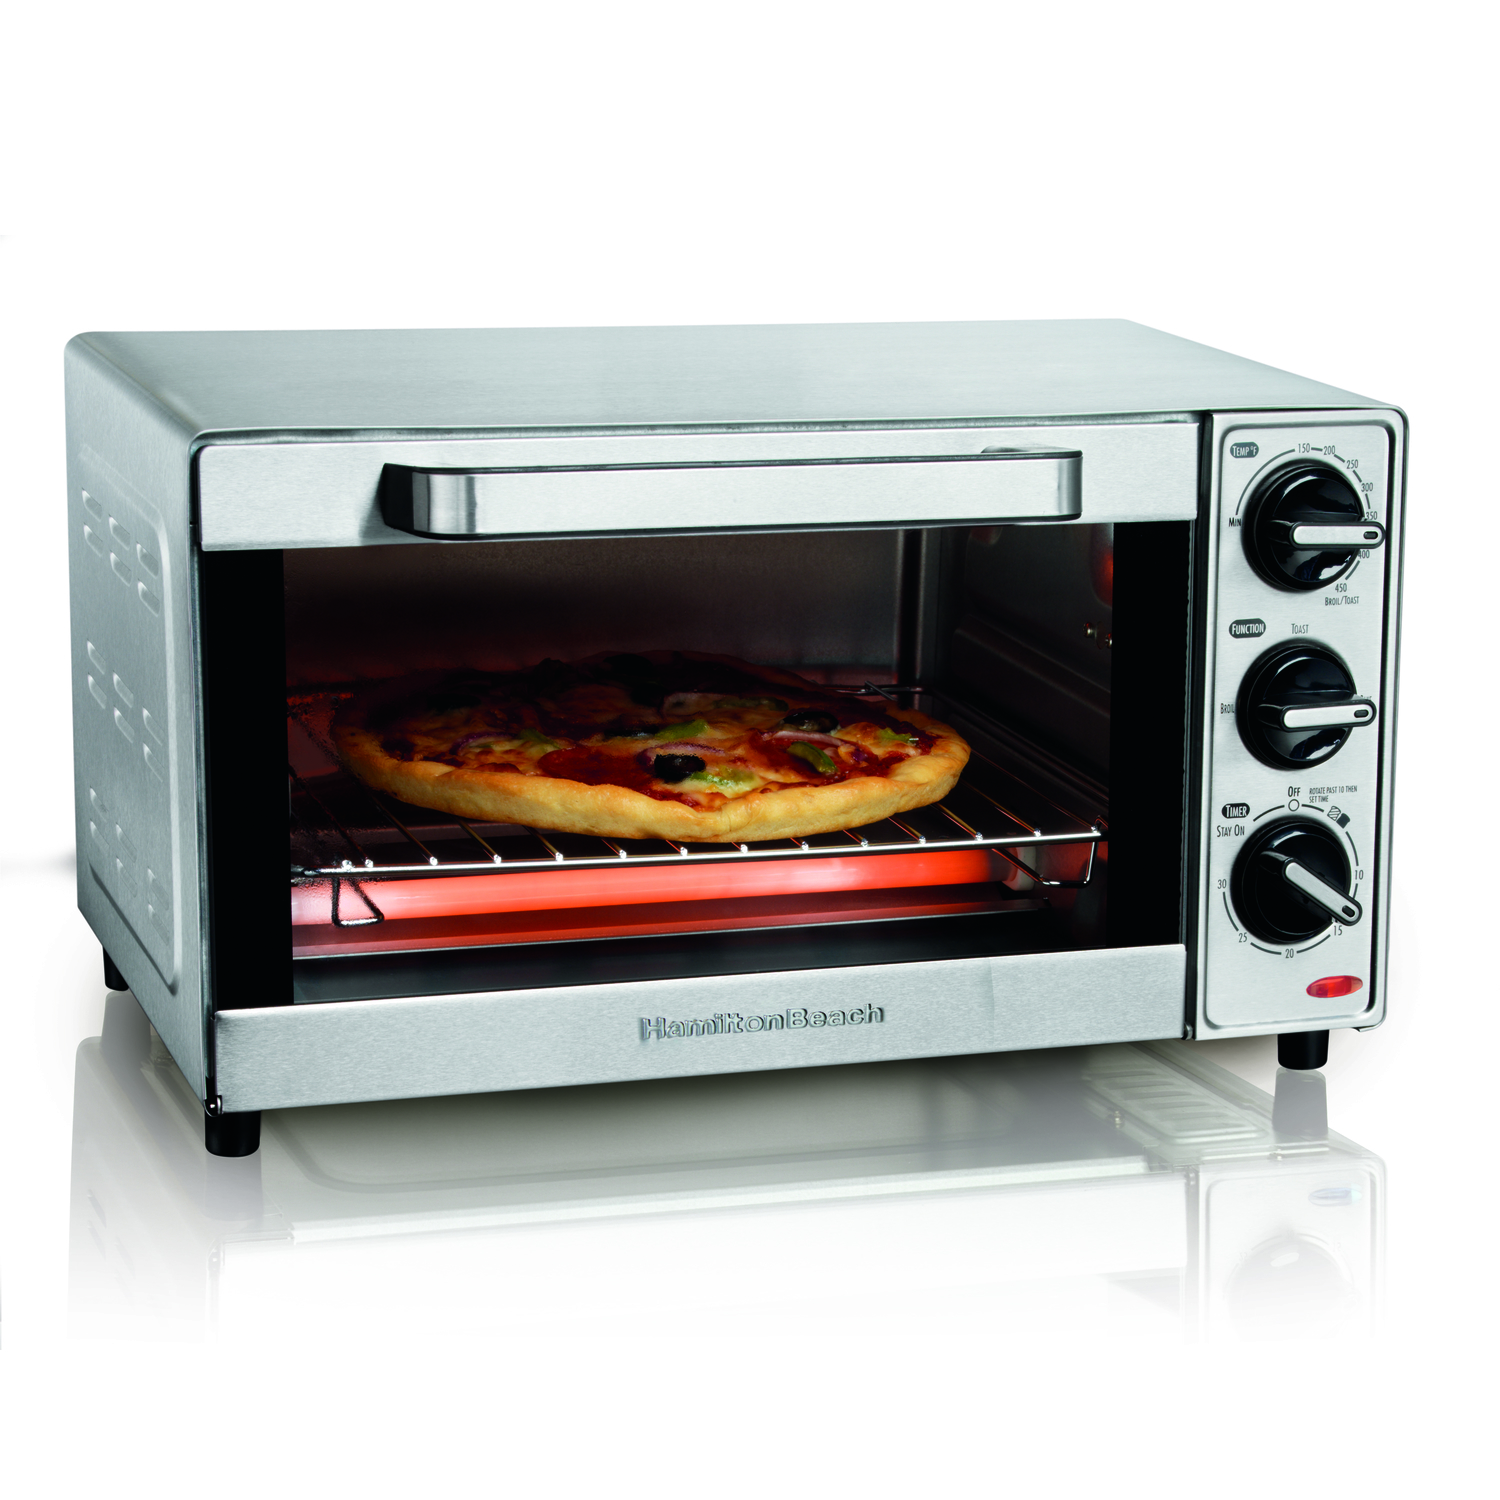 Black+Decker Stainless Steel Silver 6 slot Convection Toaster Oven 9.7 in.  H X 15.9 in. W X 12 in. D - Ace Hardware